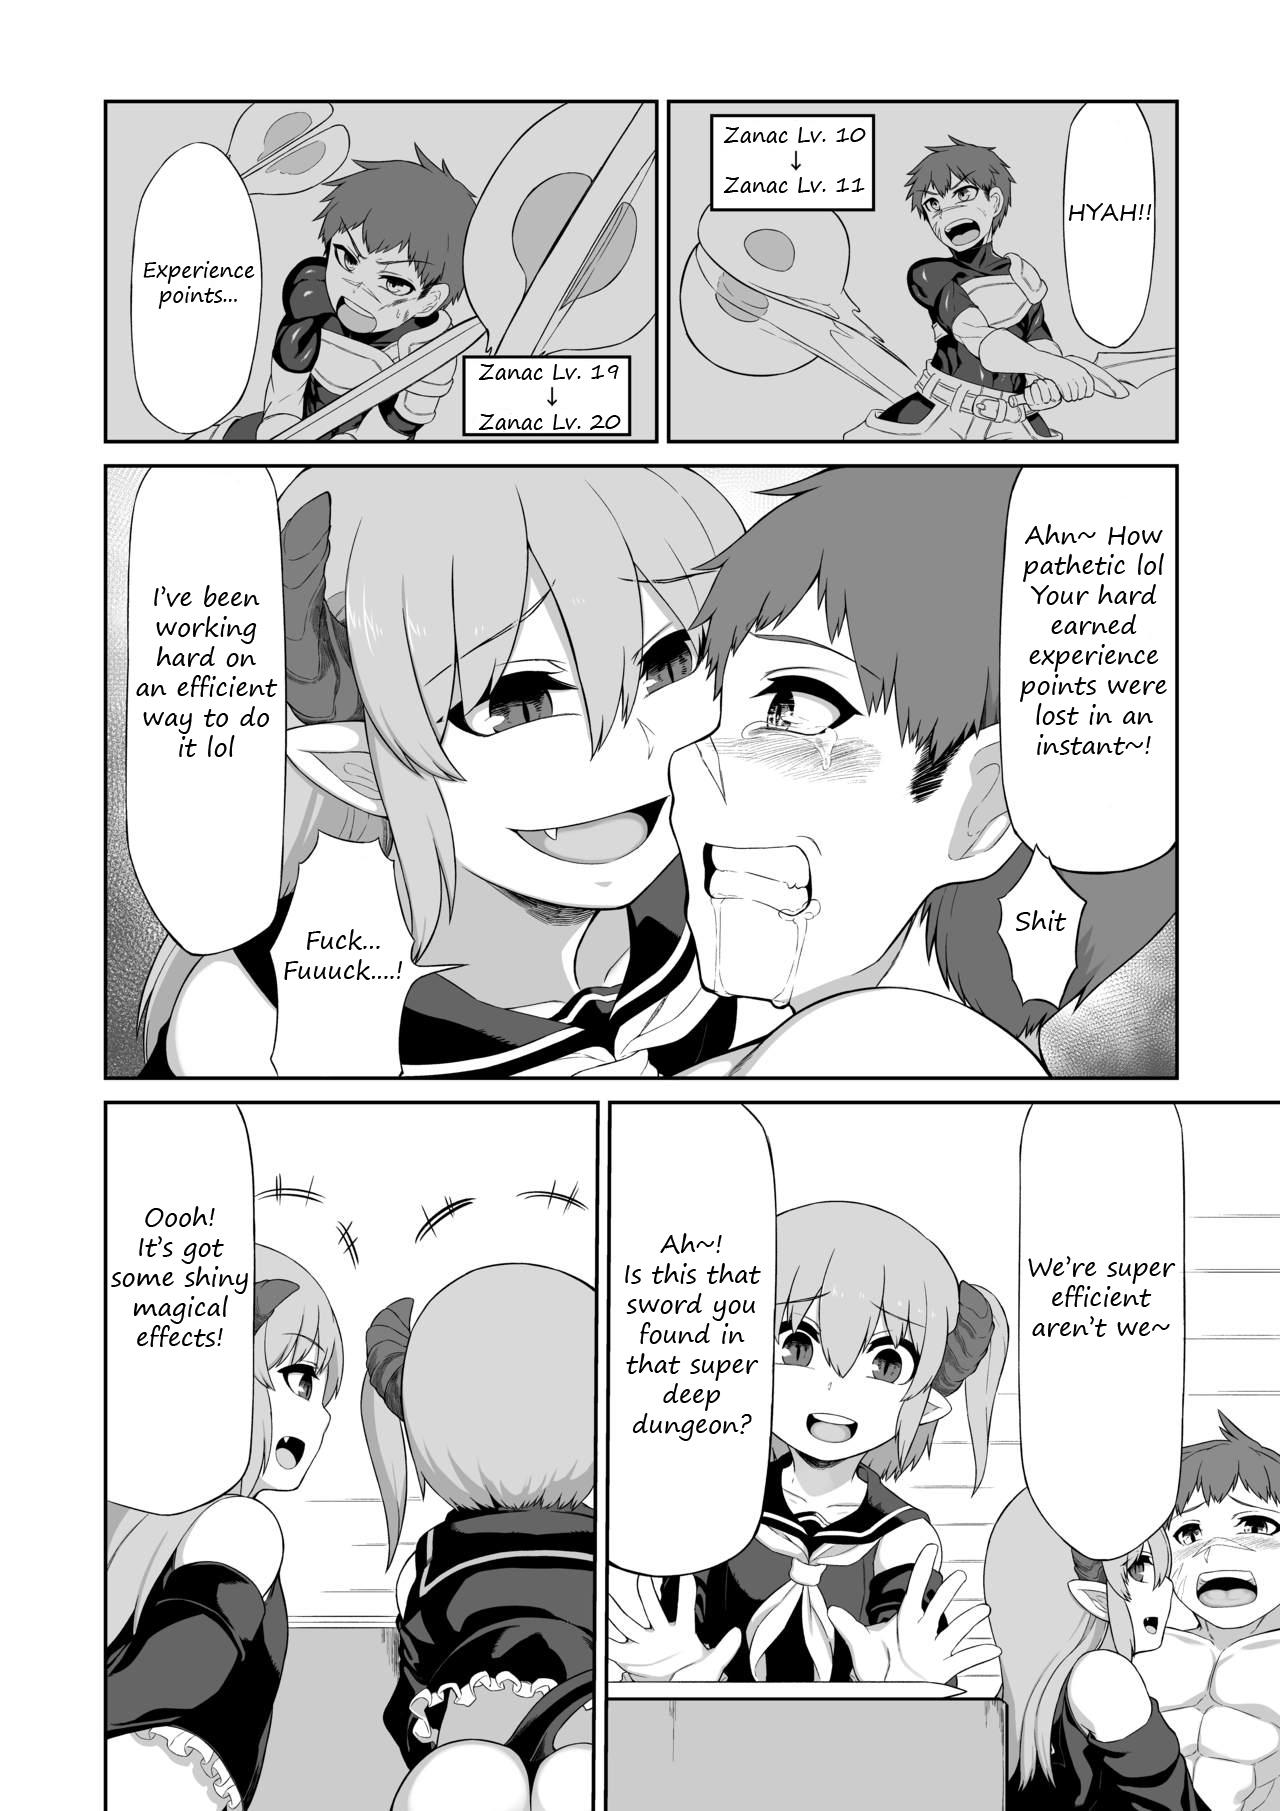 Shecock Futago Succubus to Mahou no Onaho | The Succubus Twins and the Magical Onahole - Original Bwc - Page 11